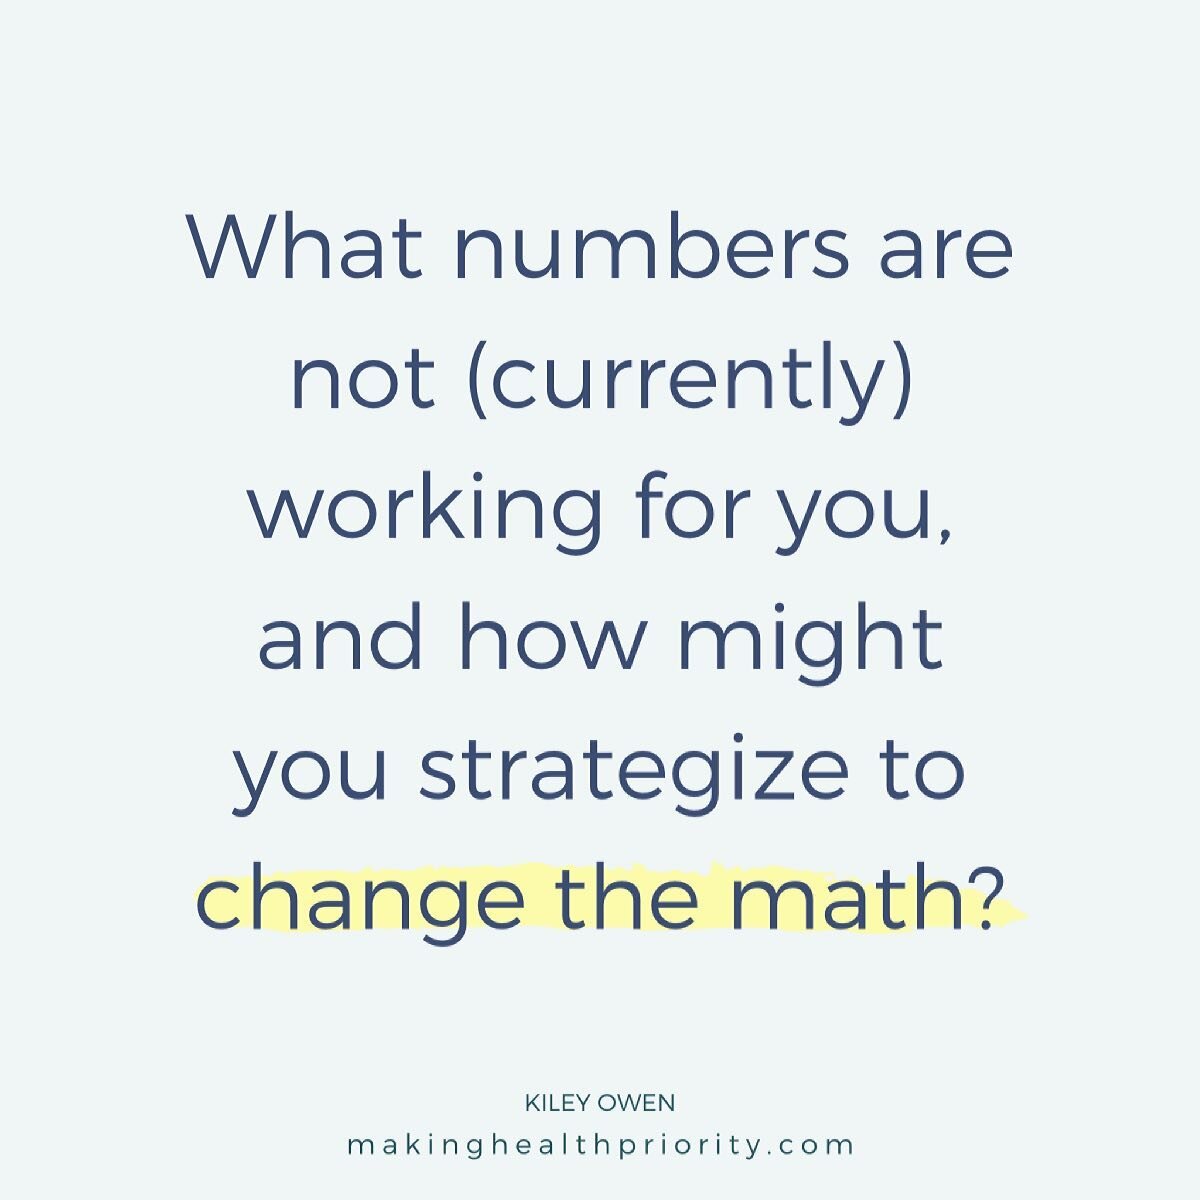 Ever notice how reaching your goals is often just a matter of simple math?

I'm talking&nbsp;SIMPLE&nbsp;math. Addition and subtraction kind of math.

For example:

🔸 If you want to lose weight, you need a calorie deficit. You can do this by consumi